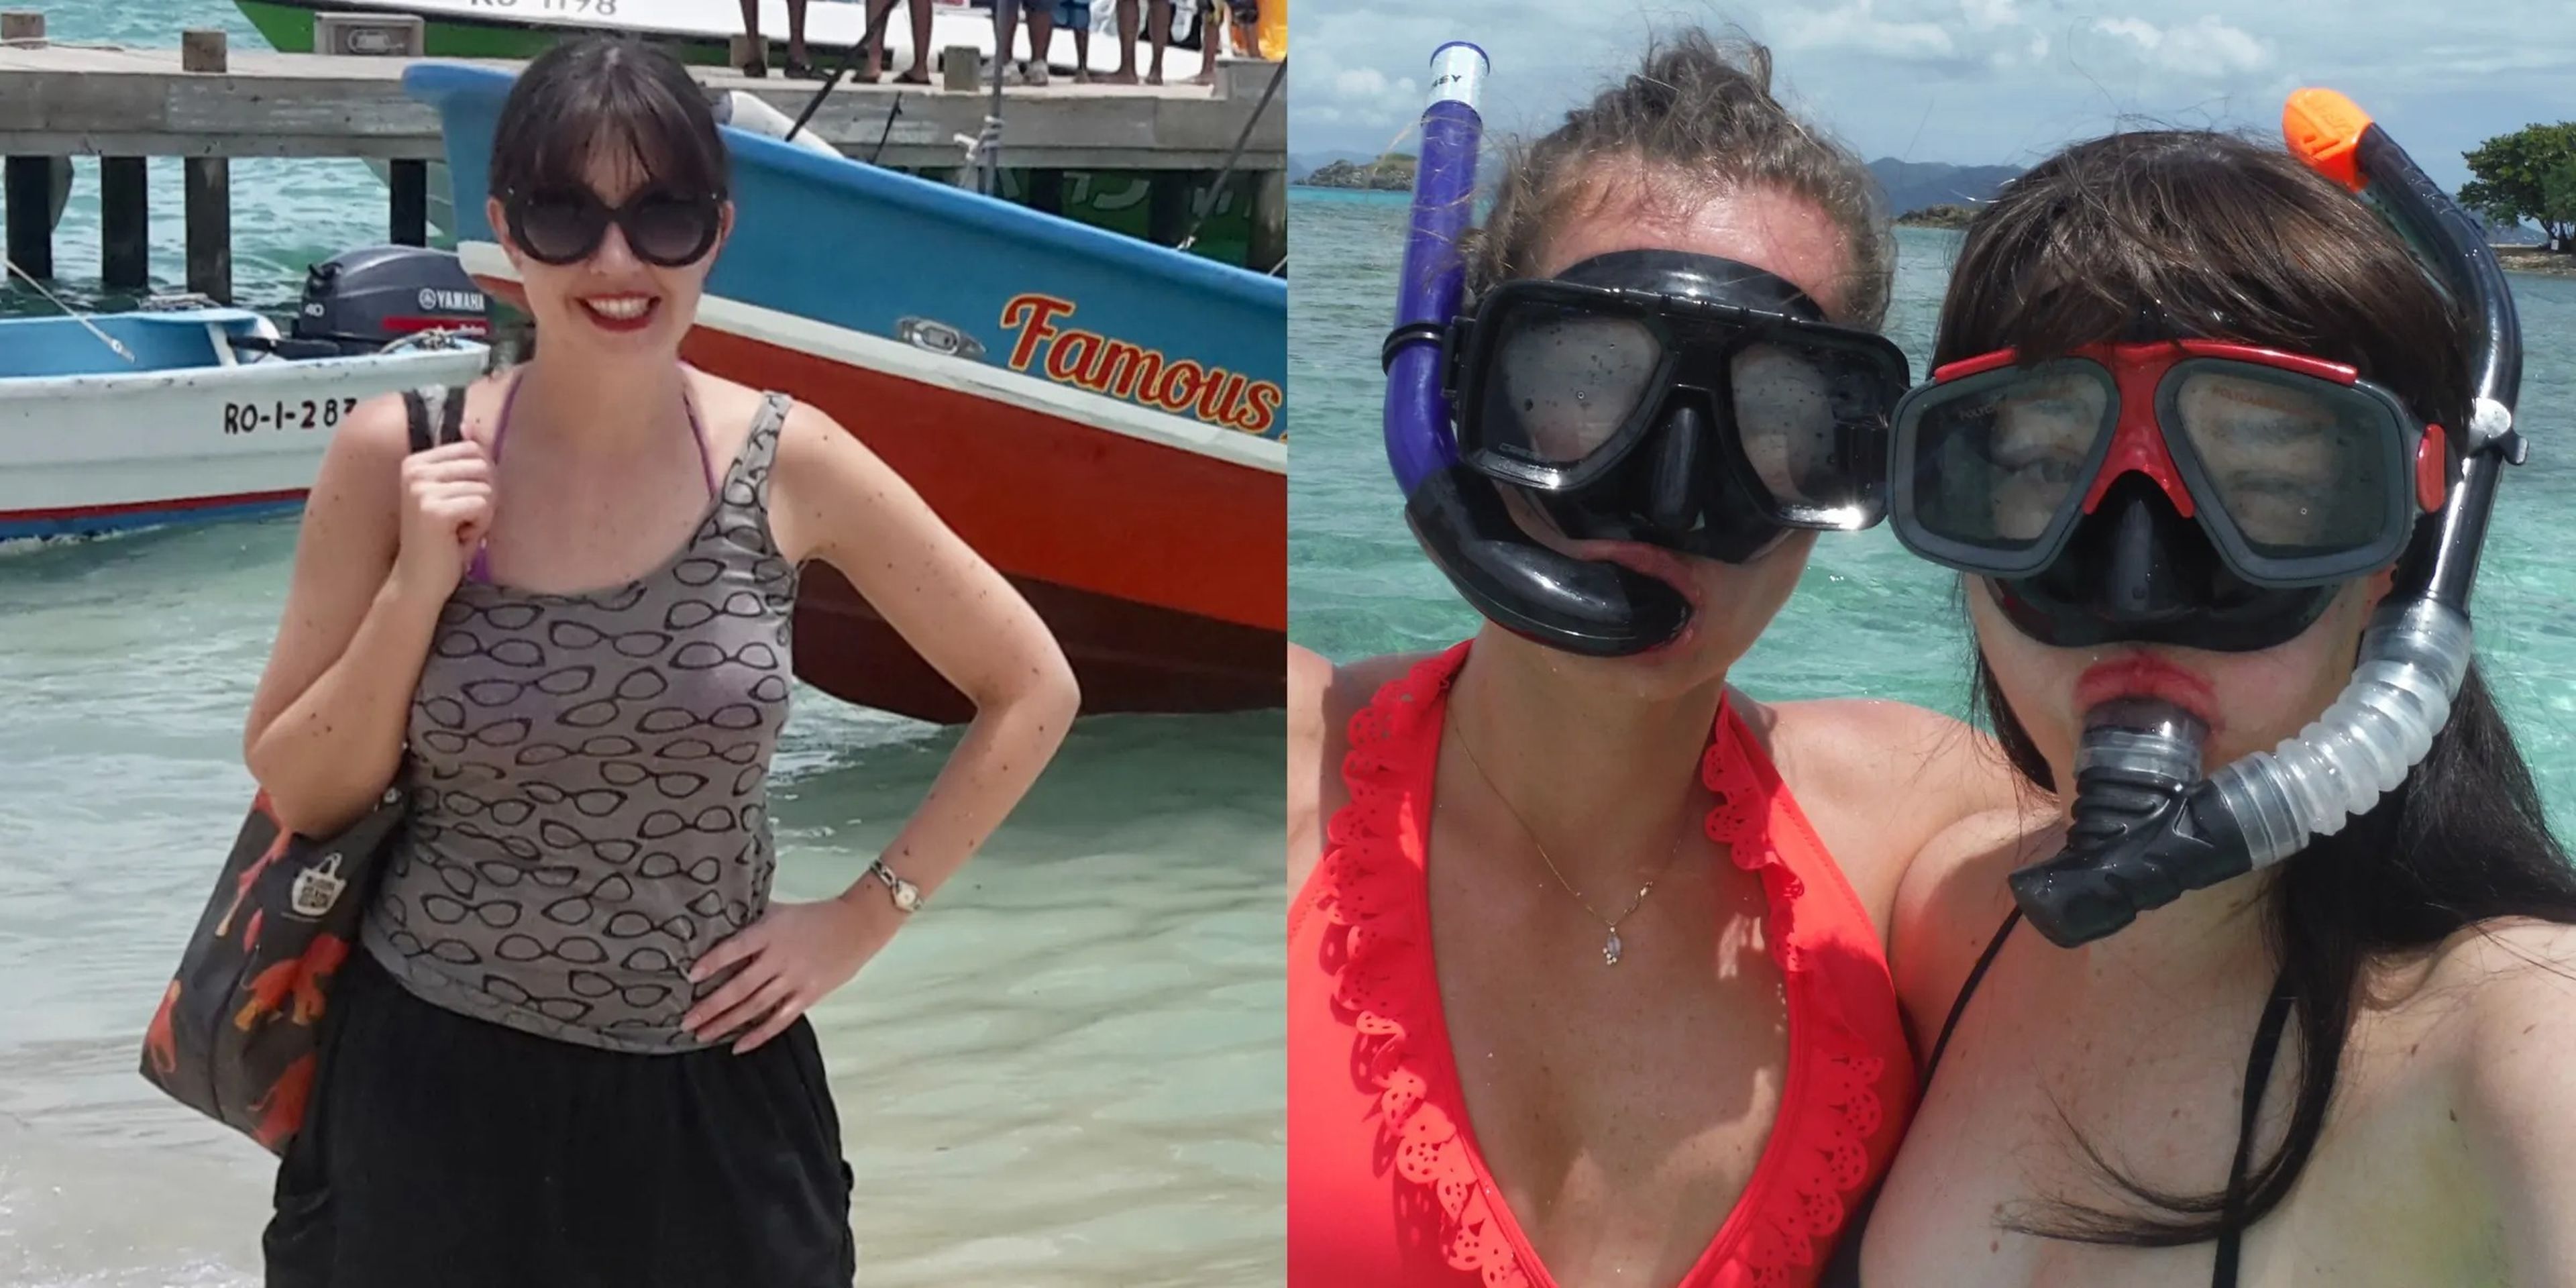 Two side-by-side images of author Sharon Waugh. On the left, Waugh with a beach bag. On the right, Waugh and a friend with snorkeling masks.